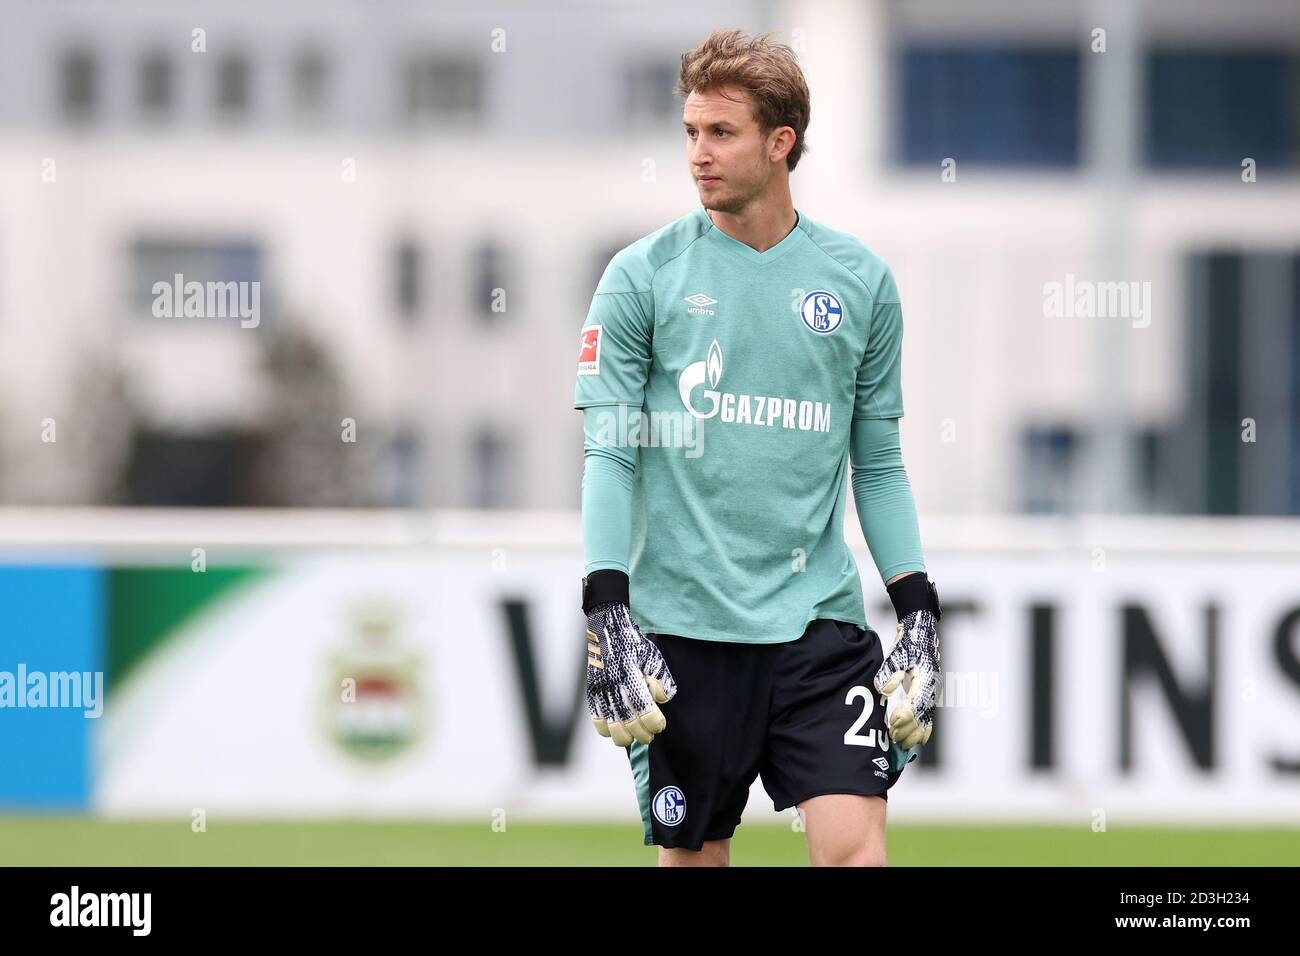 08 October 2020, North Rhine-Westphalia, Gelsenkirchen: Football: Test matches, FC Schalke 04 - SC Paderborn in the Parkstadion. Schalke's goalkeeper Frederik Rönnow is on the pitch. Photo: Guido Kirchner/dpa - IMPORTANT NOTE: In accordance with the regulations of the DFL Deutsche Fußball Liga and the DFB Deutscher Fußball-Bund, it is prohibited to exploit or have exploited in the stadium and/or from the game taken photographs in the form of sequence images and/or video-like photo series. Stock Photo